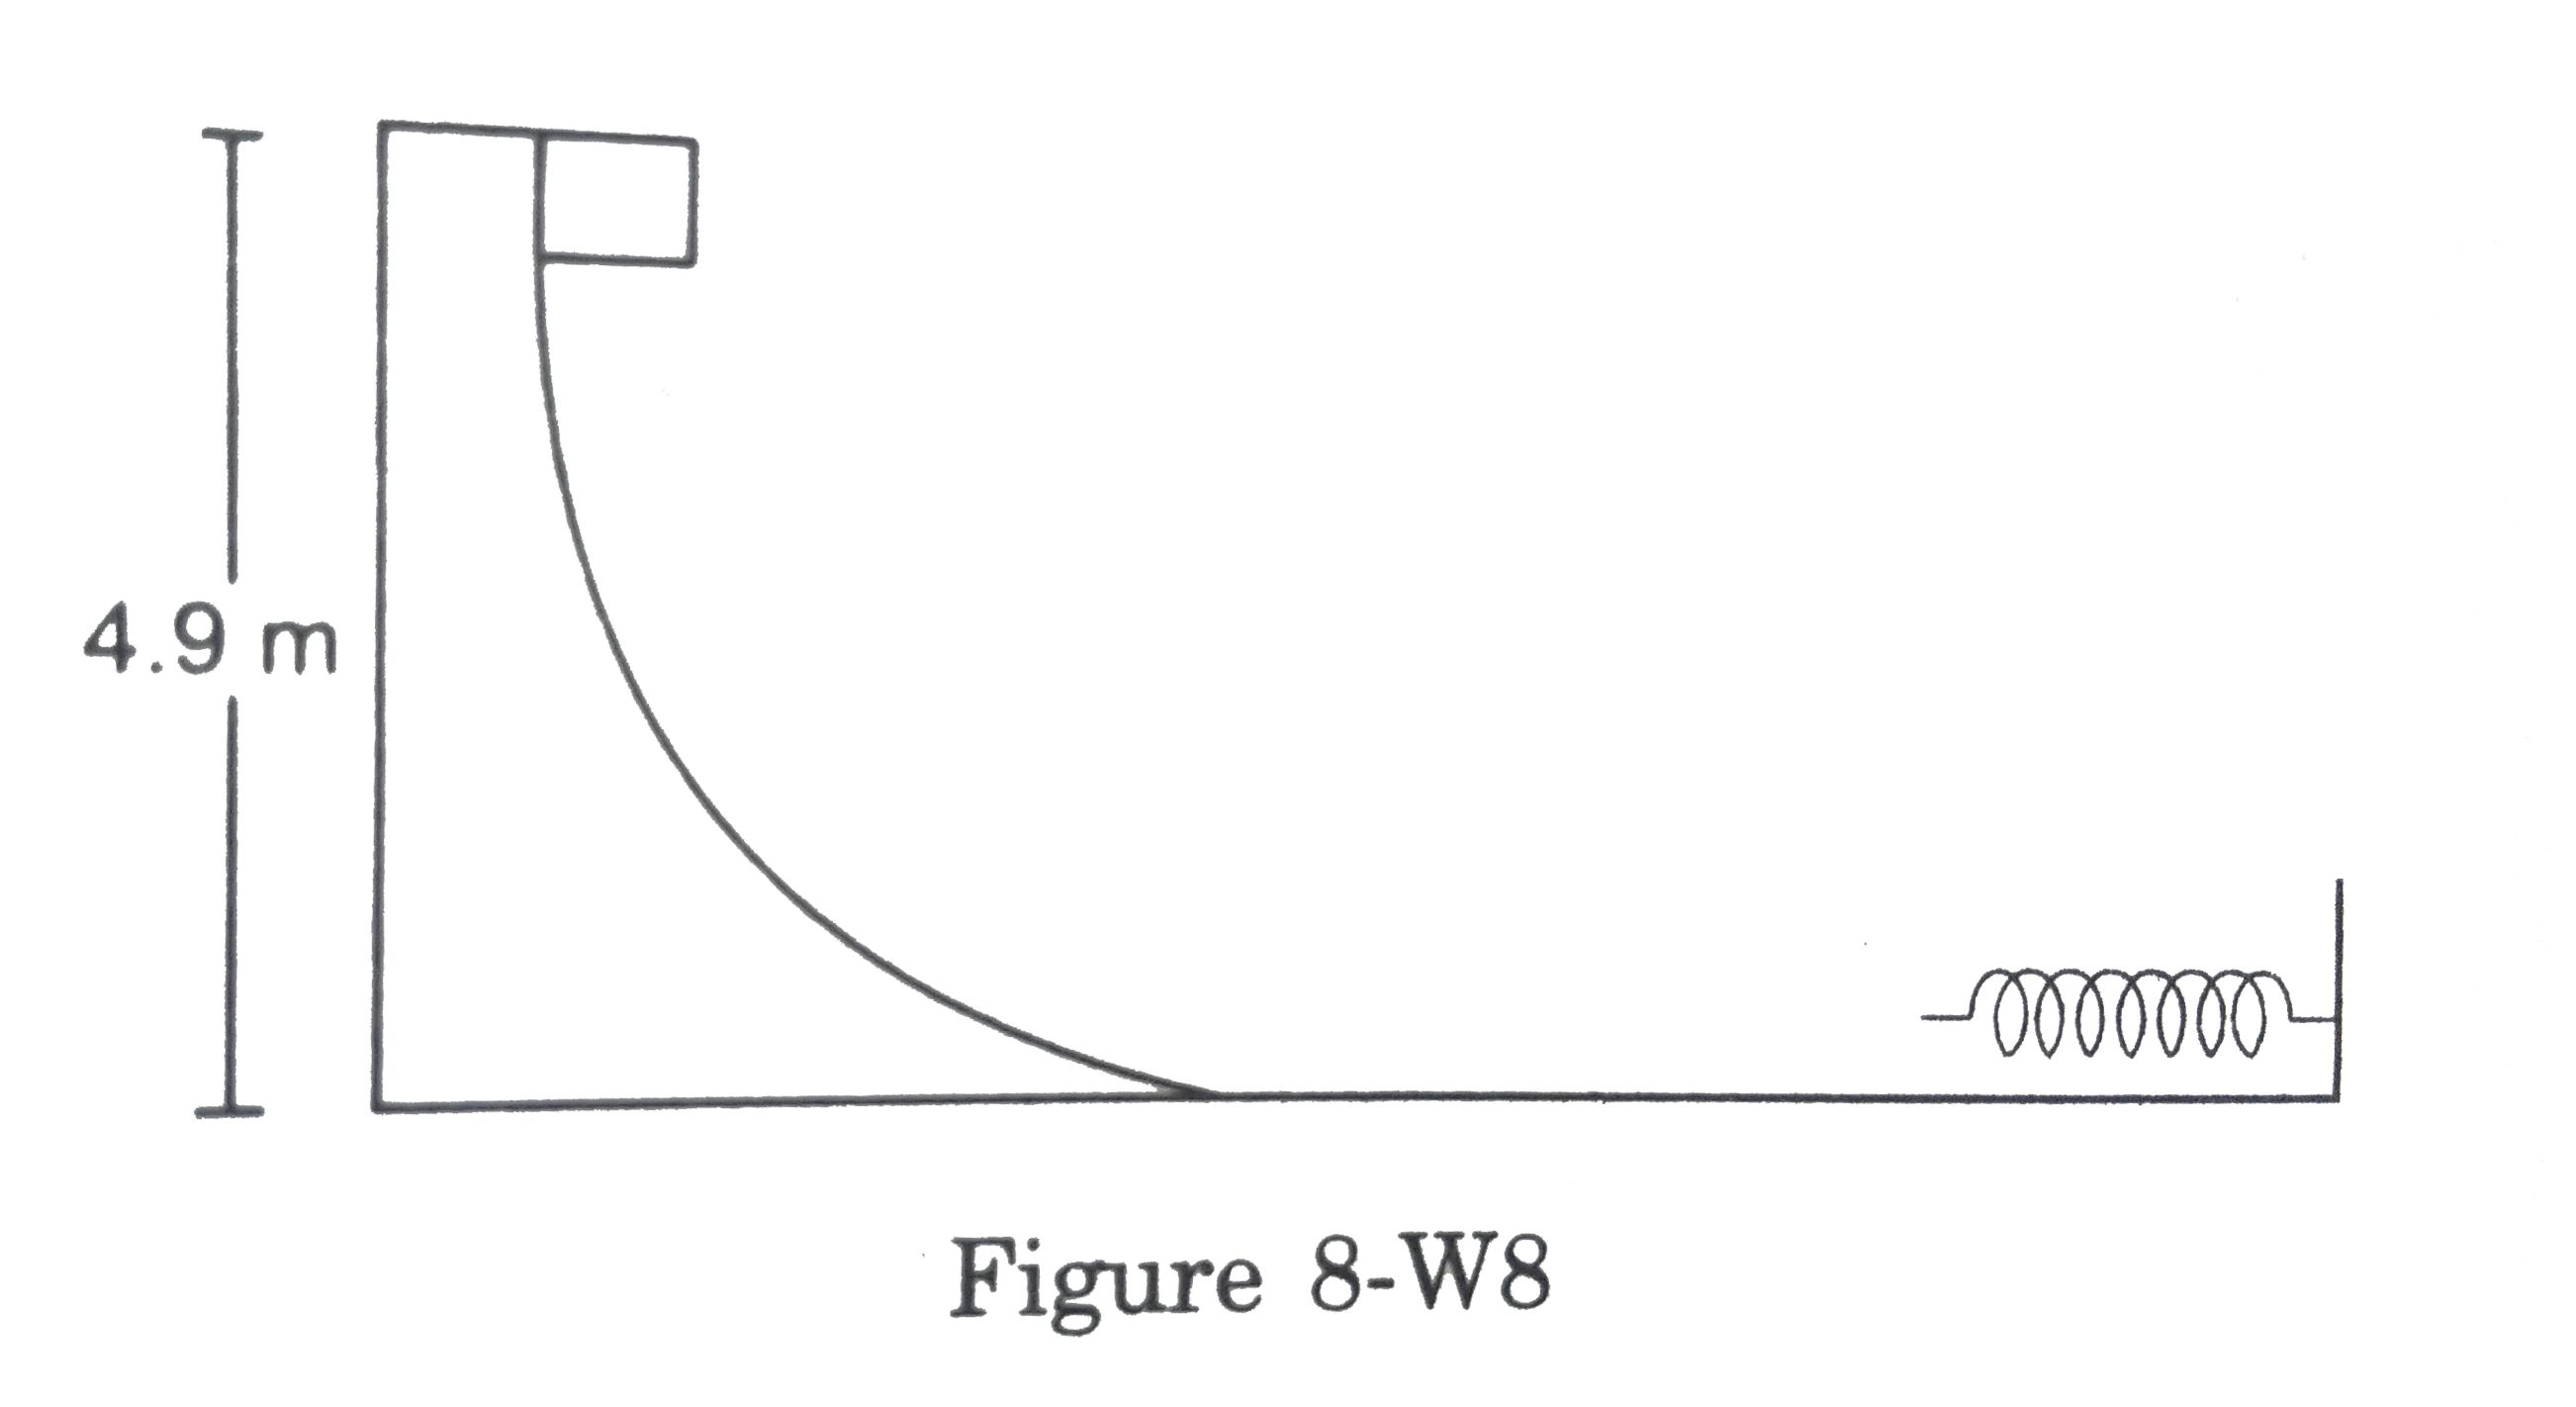 Figure shows a smooth curved track terminating in a smooth horizontal part. A spring of sprng constant 400 N/m is asttached at one end ot a wedge fixed rigidly with the horizontal part. A 40 g mas is released from rest at a height of 4.9 m n the curved track. Find the maximumcompression of the spring.